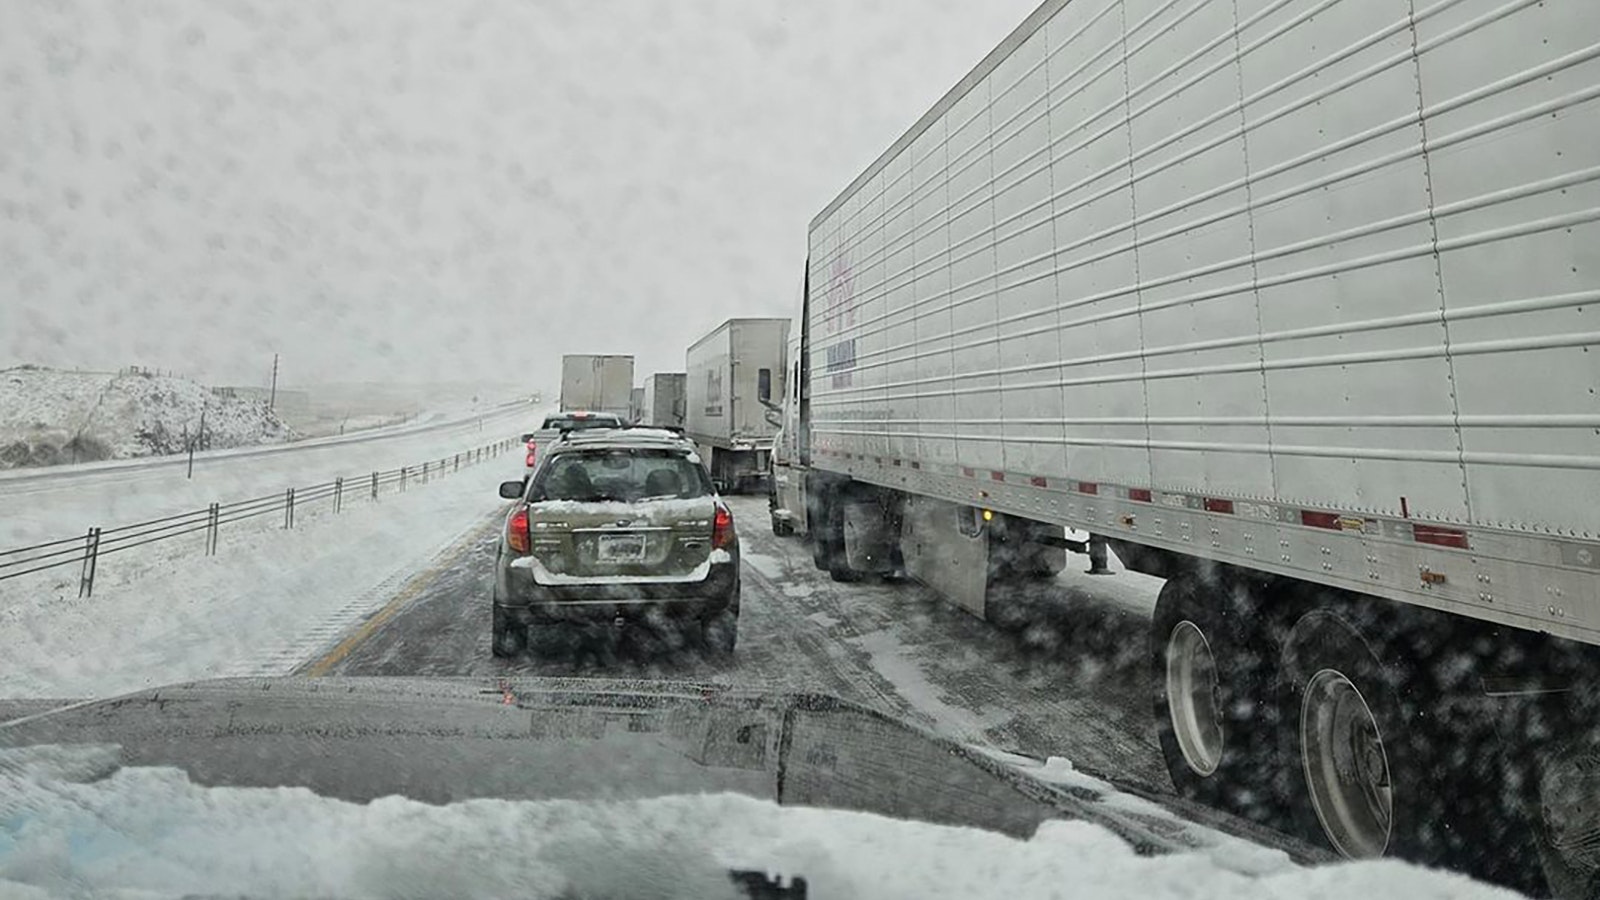 Traffic is at a standstill as the snow falls Thursday.